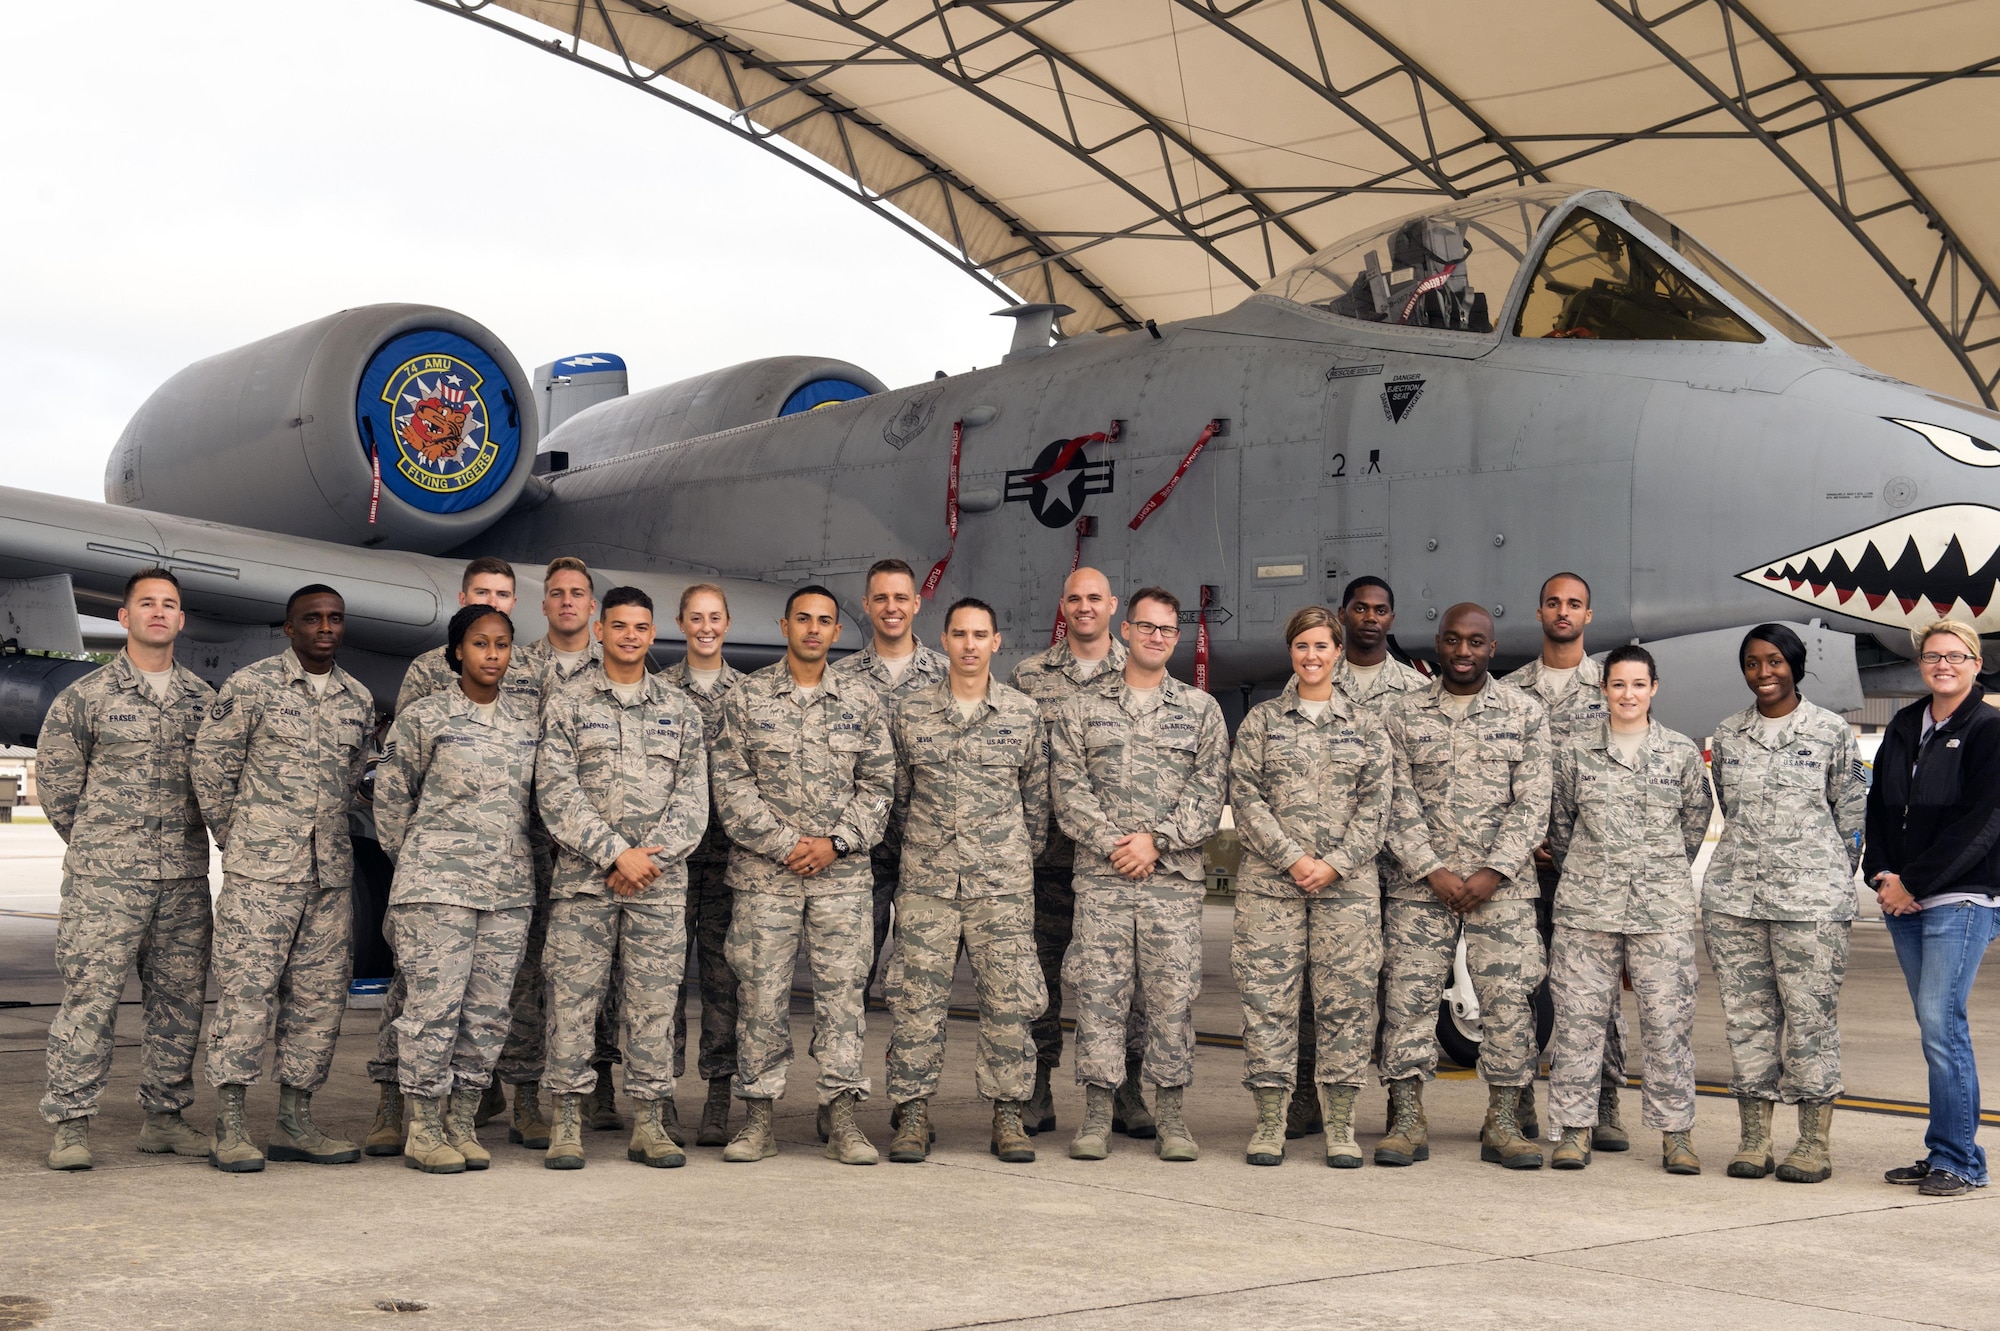 Airmen from the first iteration of the Emerge Moody program pose beside an A-10C Thunderbolt II, Oct. 6, 2016, at Moody Air Force Base, Ga. These Airmen from various career fields began a nine-month course designed to better understand Moody’s mission. They will learn about the combat rescue, base defense, close-air-support, law enforcement and mission support missions on base. (U.S. Air Force photo by Airman 1st Class Greg Nash)